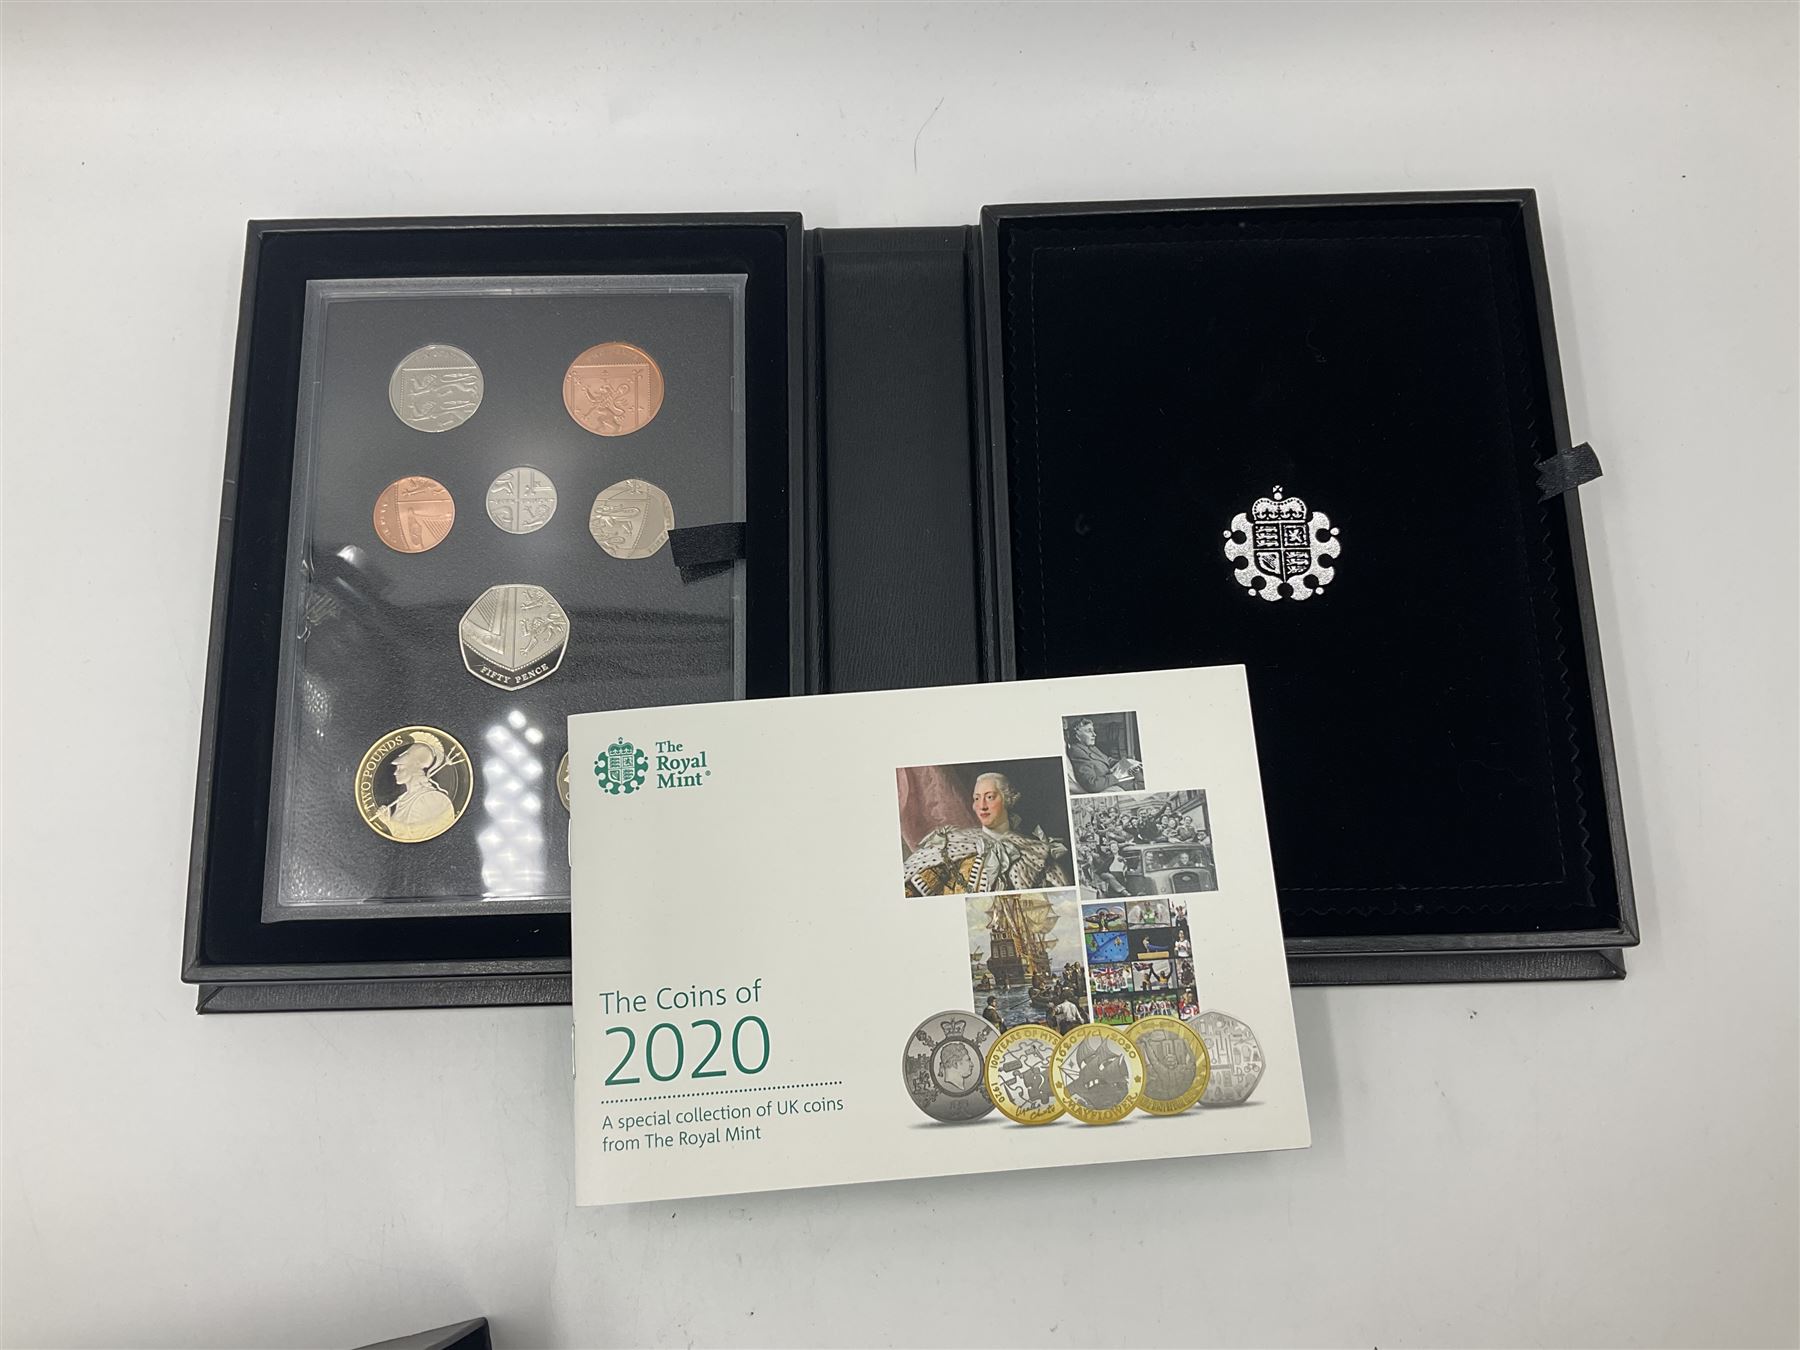 The Royal Mint United Kingdom 2020 proof coin set - Image 6 of 7